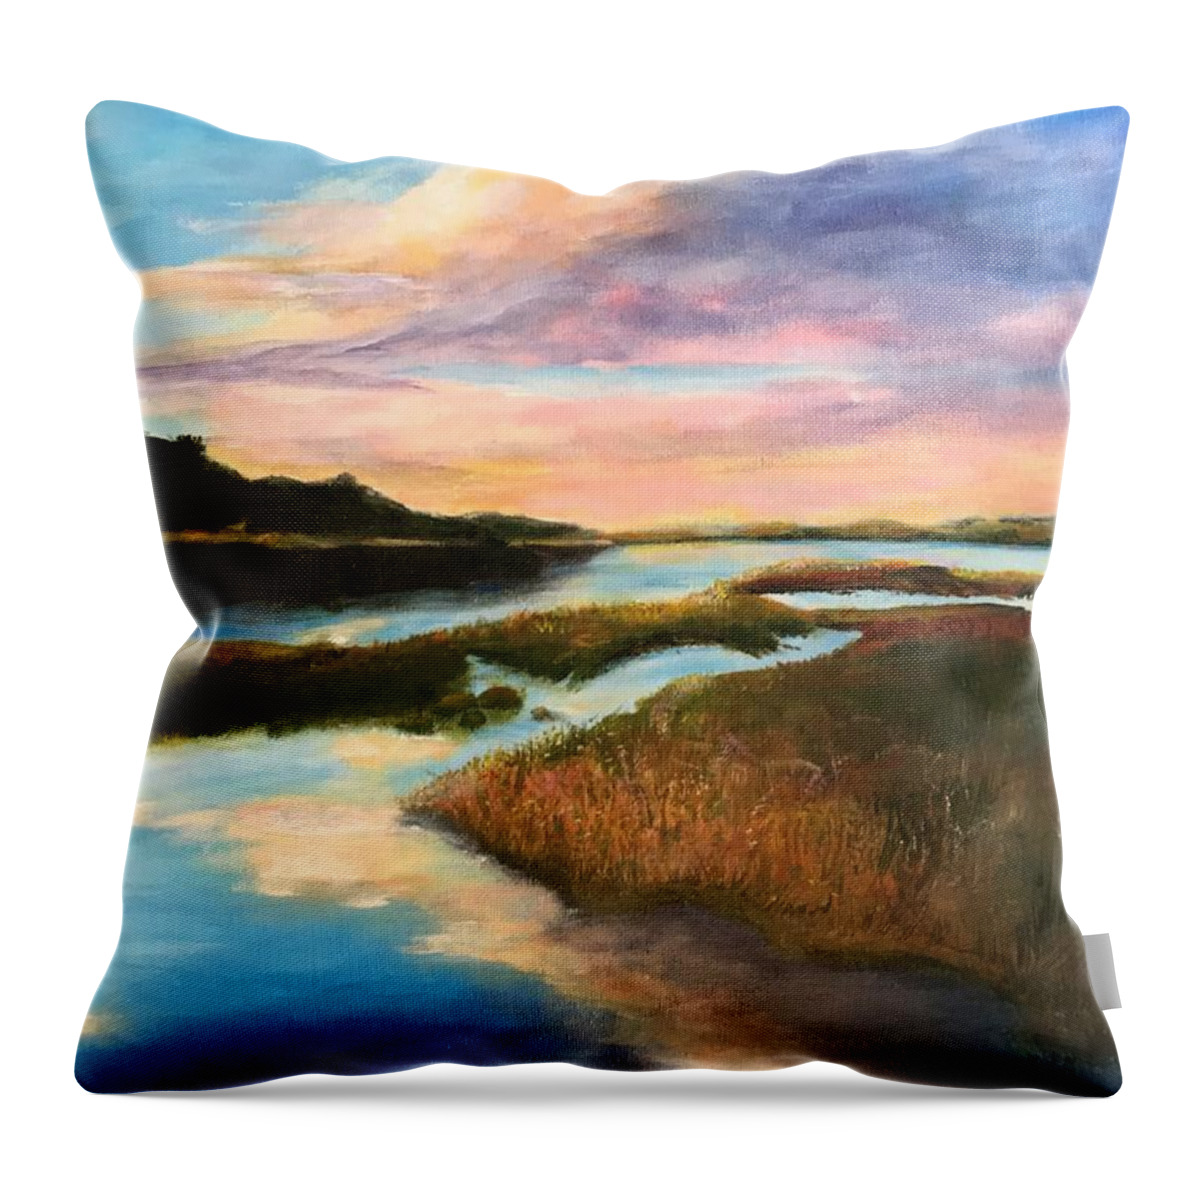 Marsh Throw Pillow featuring the painting Marsh Reflections by Deborah Naves